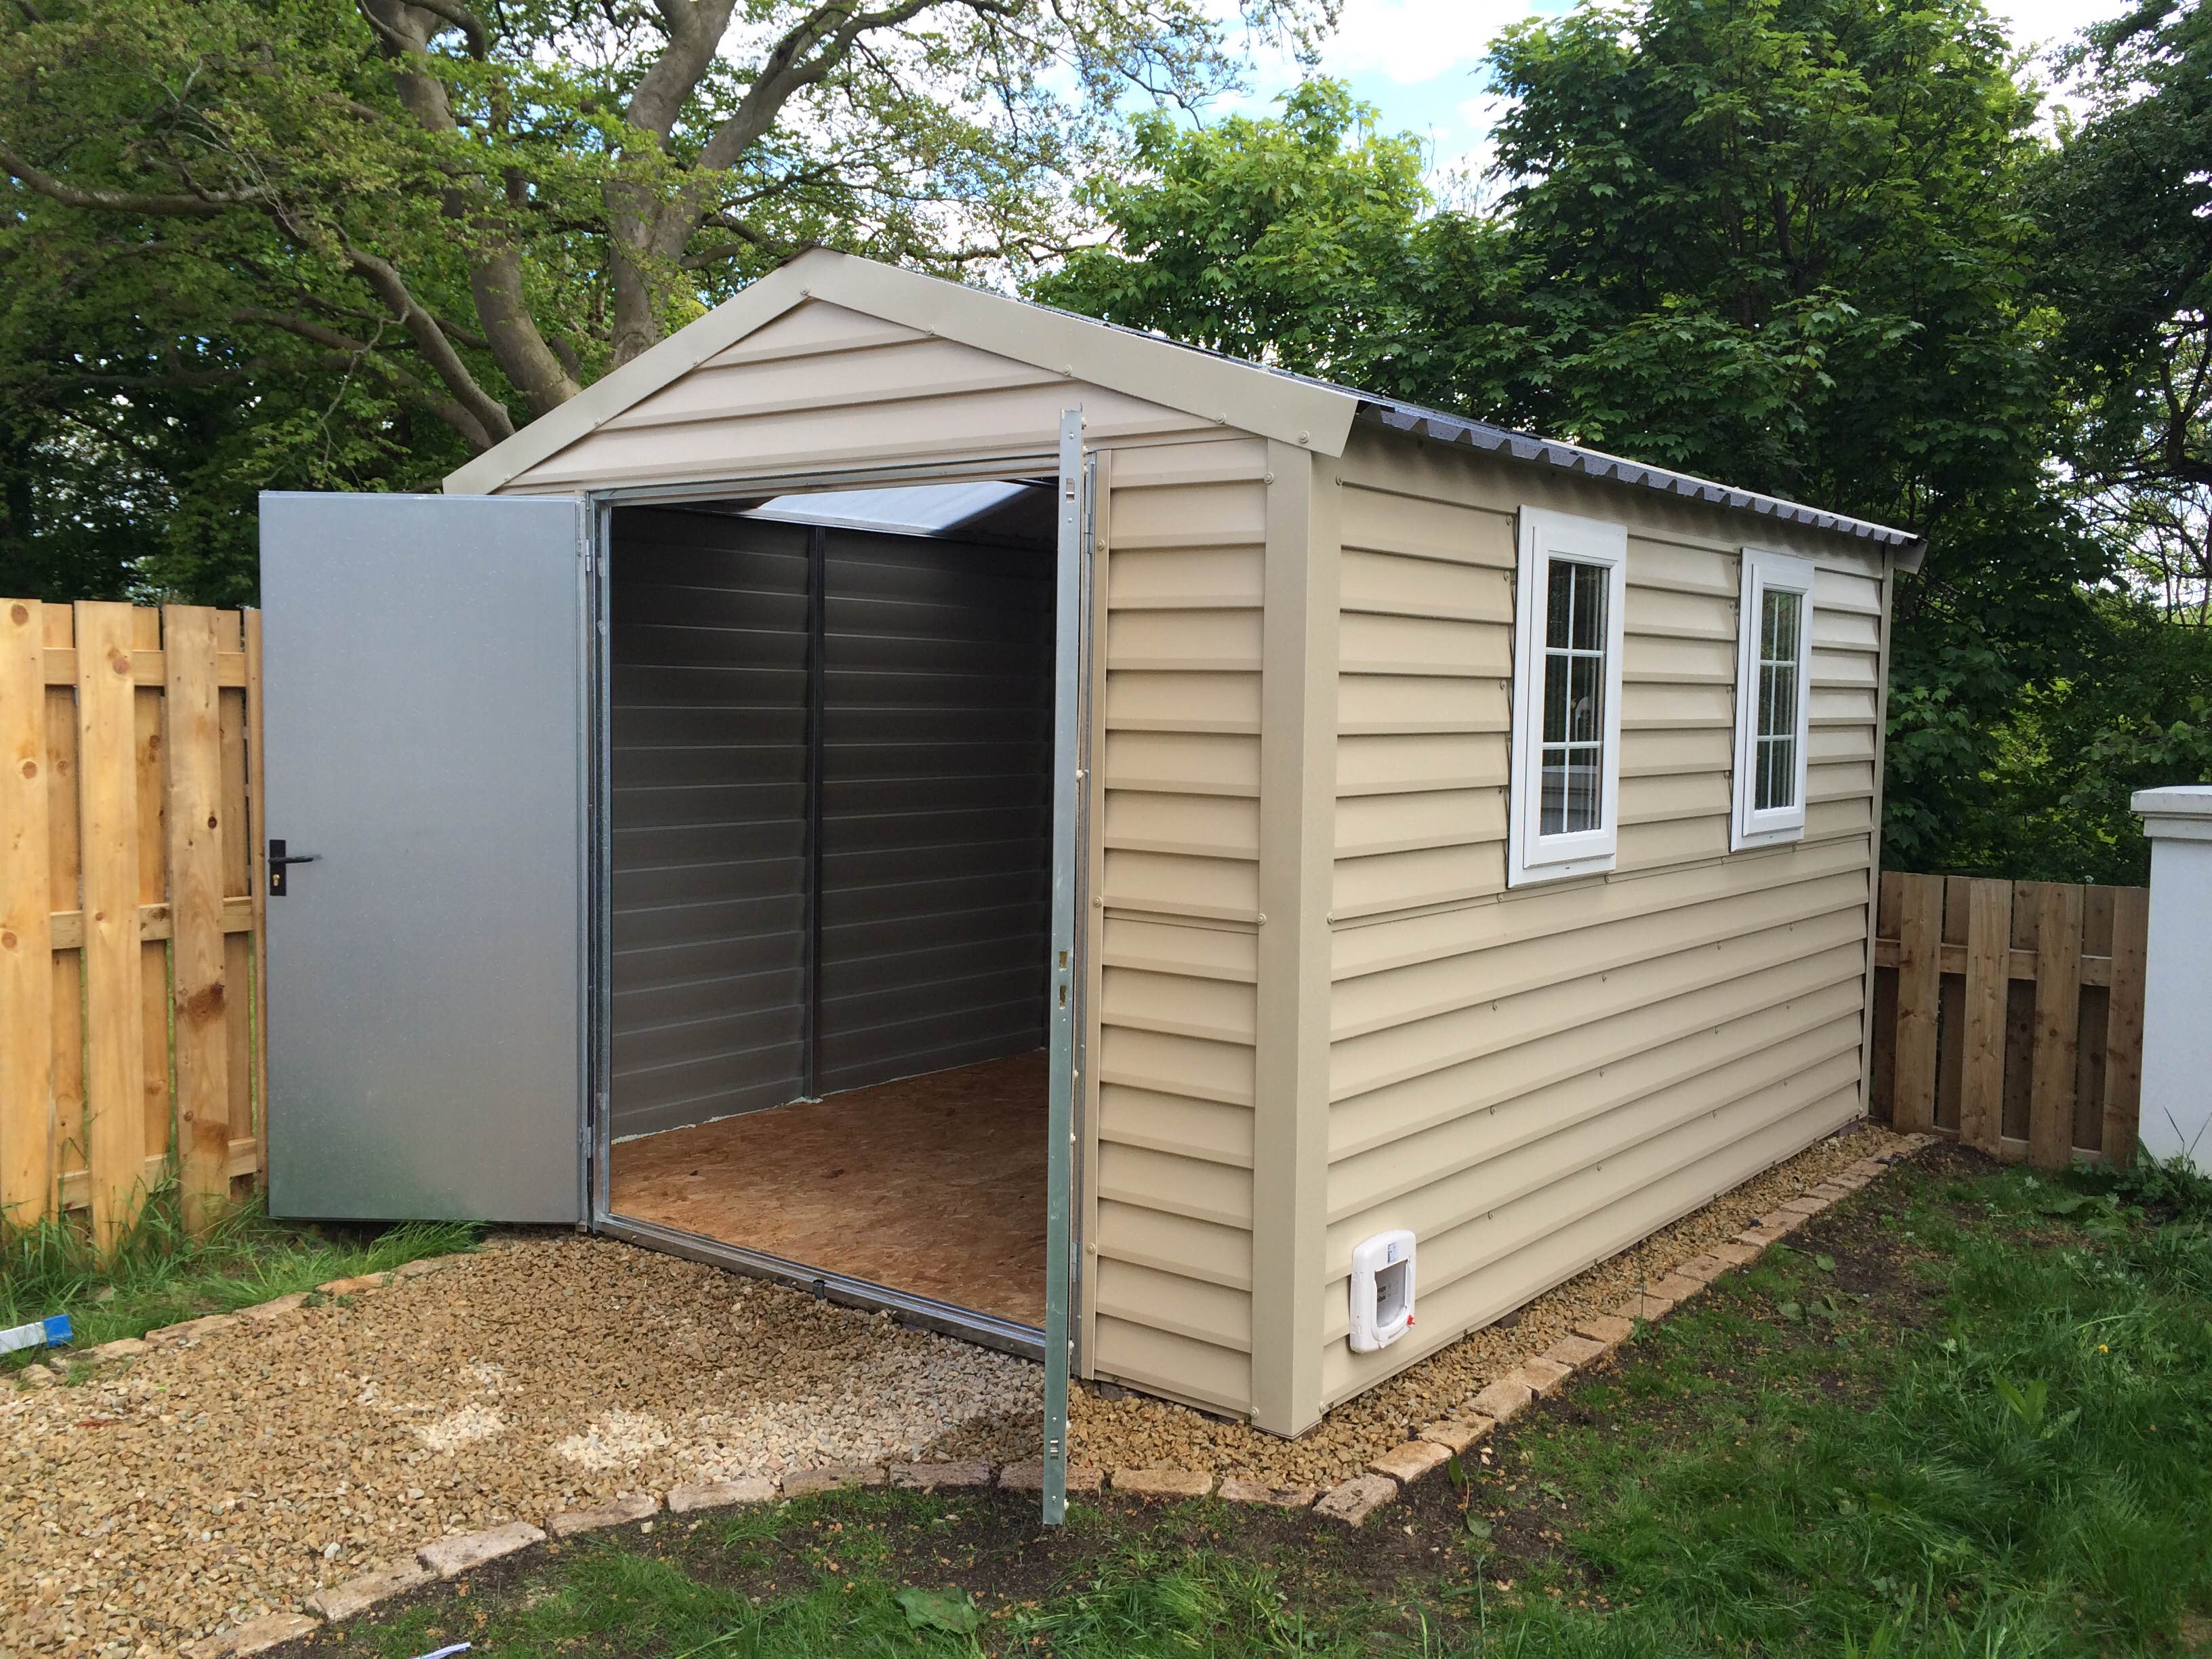 What to Look for when Buying a Garden Shed - Consider ...